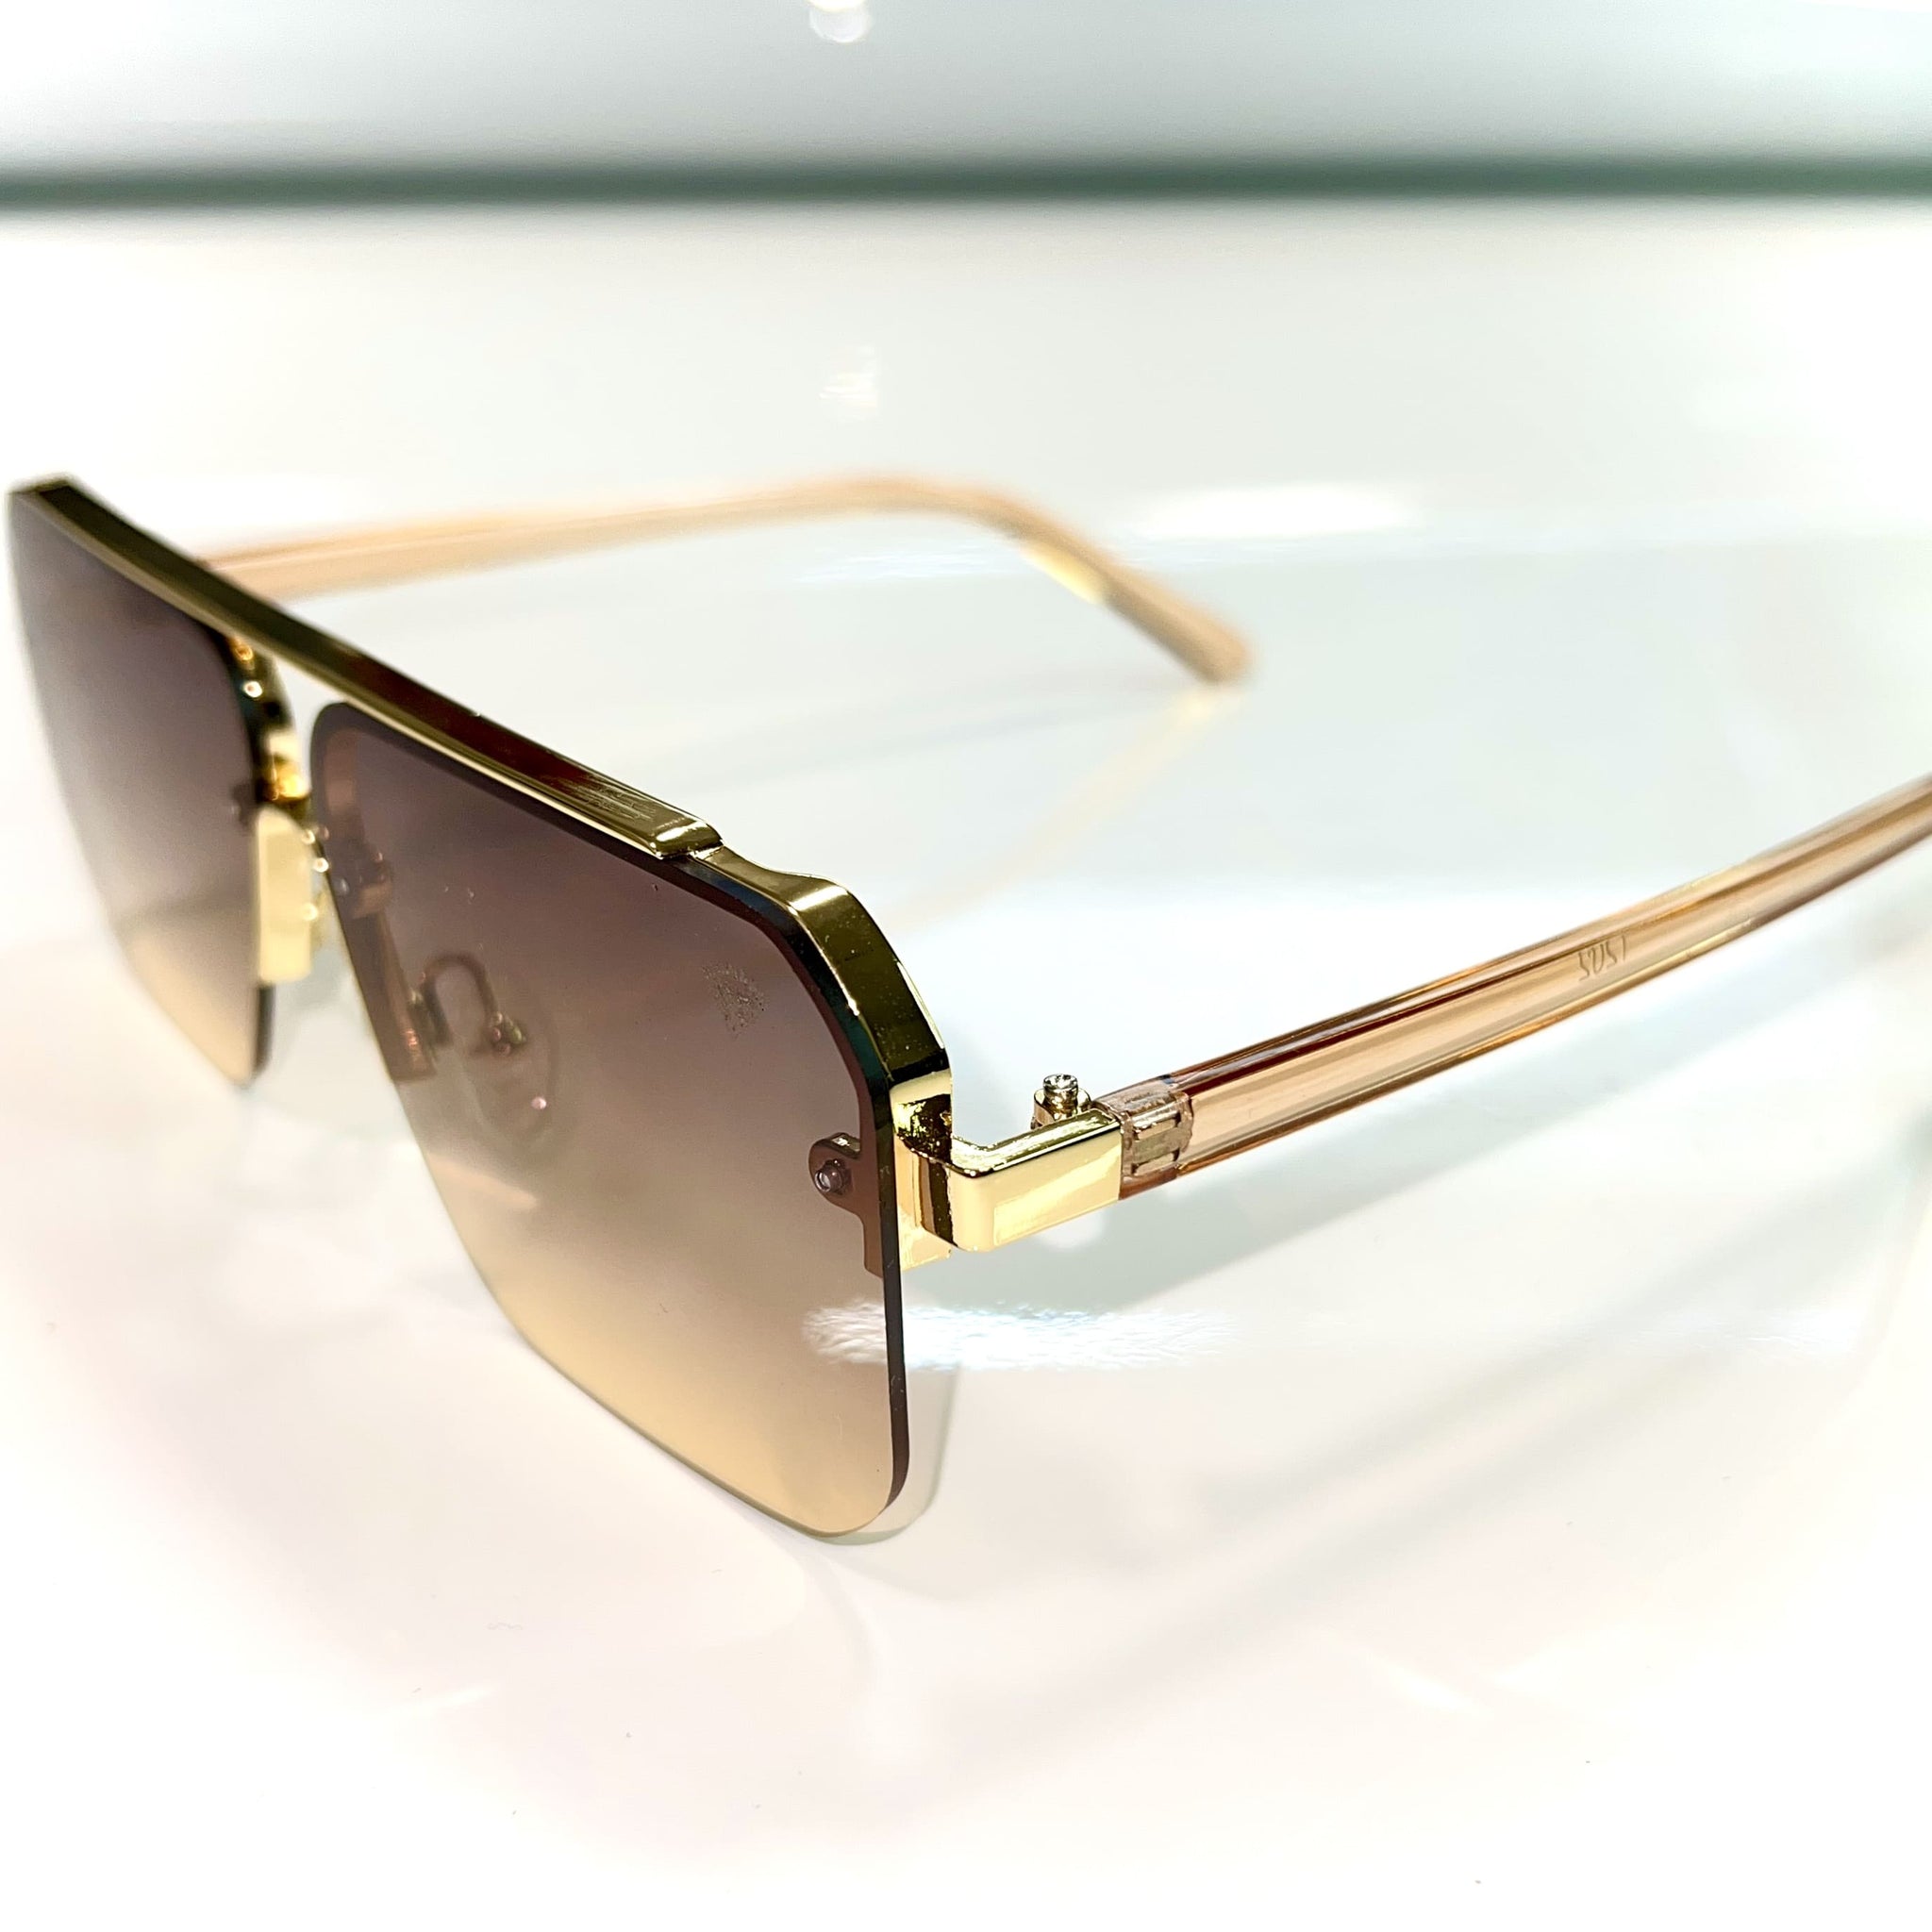 Macho Glasses - 14 carat gold plated / Silicon Side - Brown Shade - Sehgal Glasses